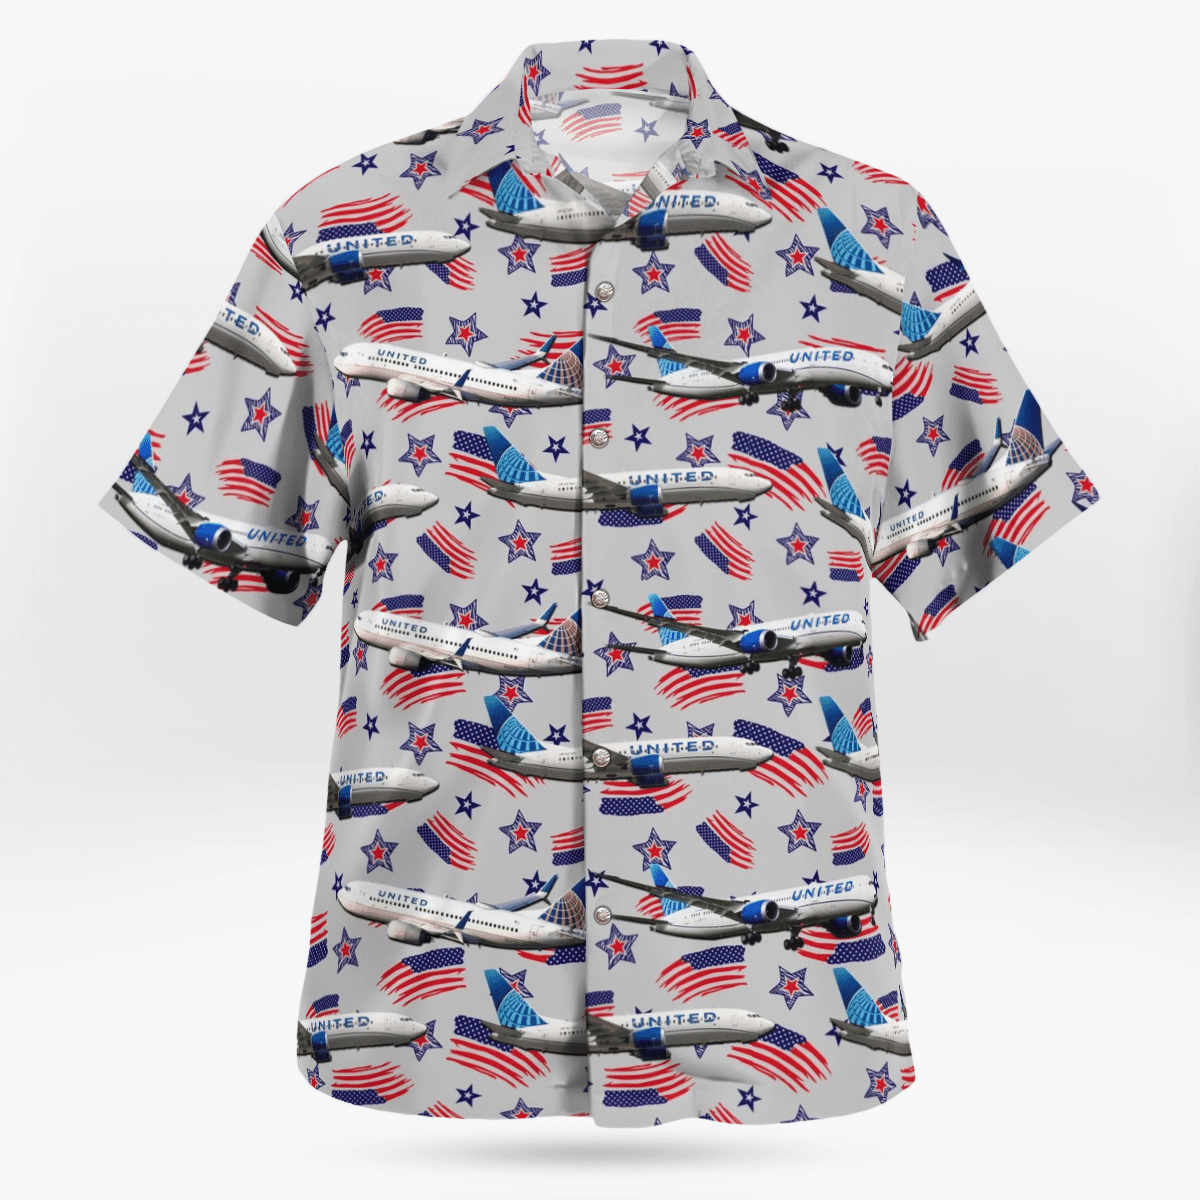 COOL United Airlines Fleet Independence Day 3D Hawaii Shirt2